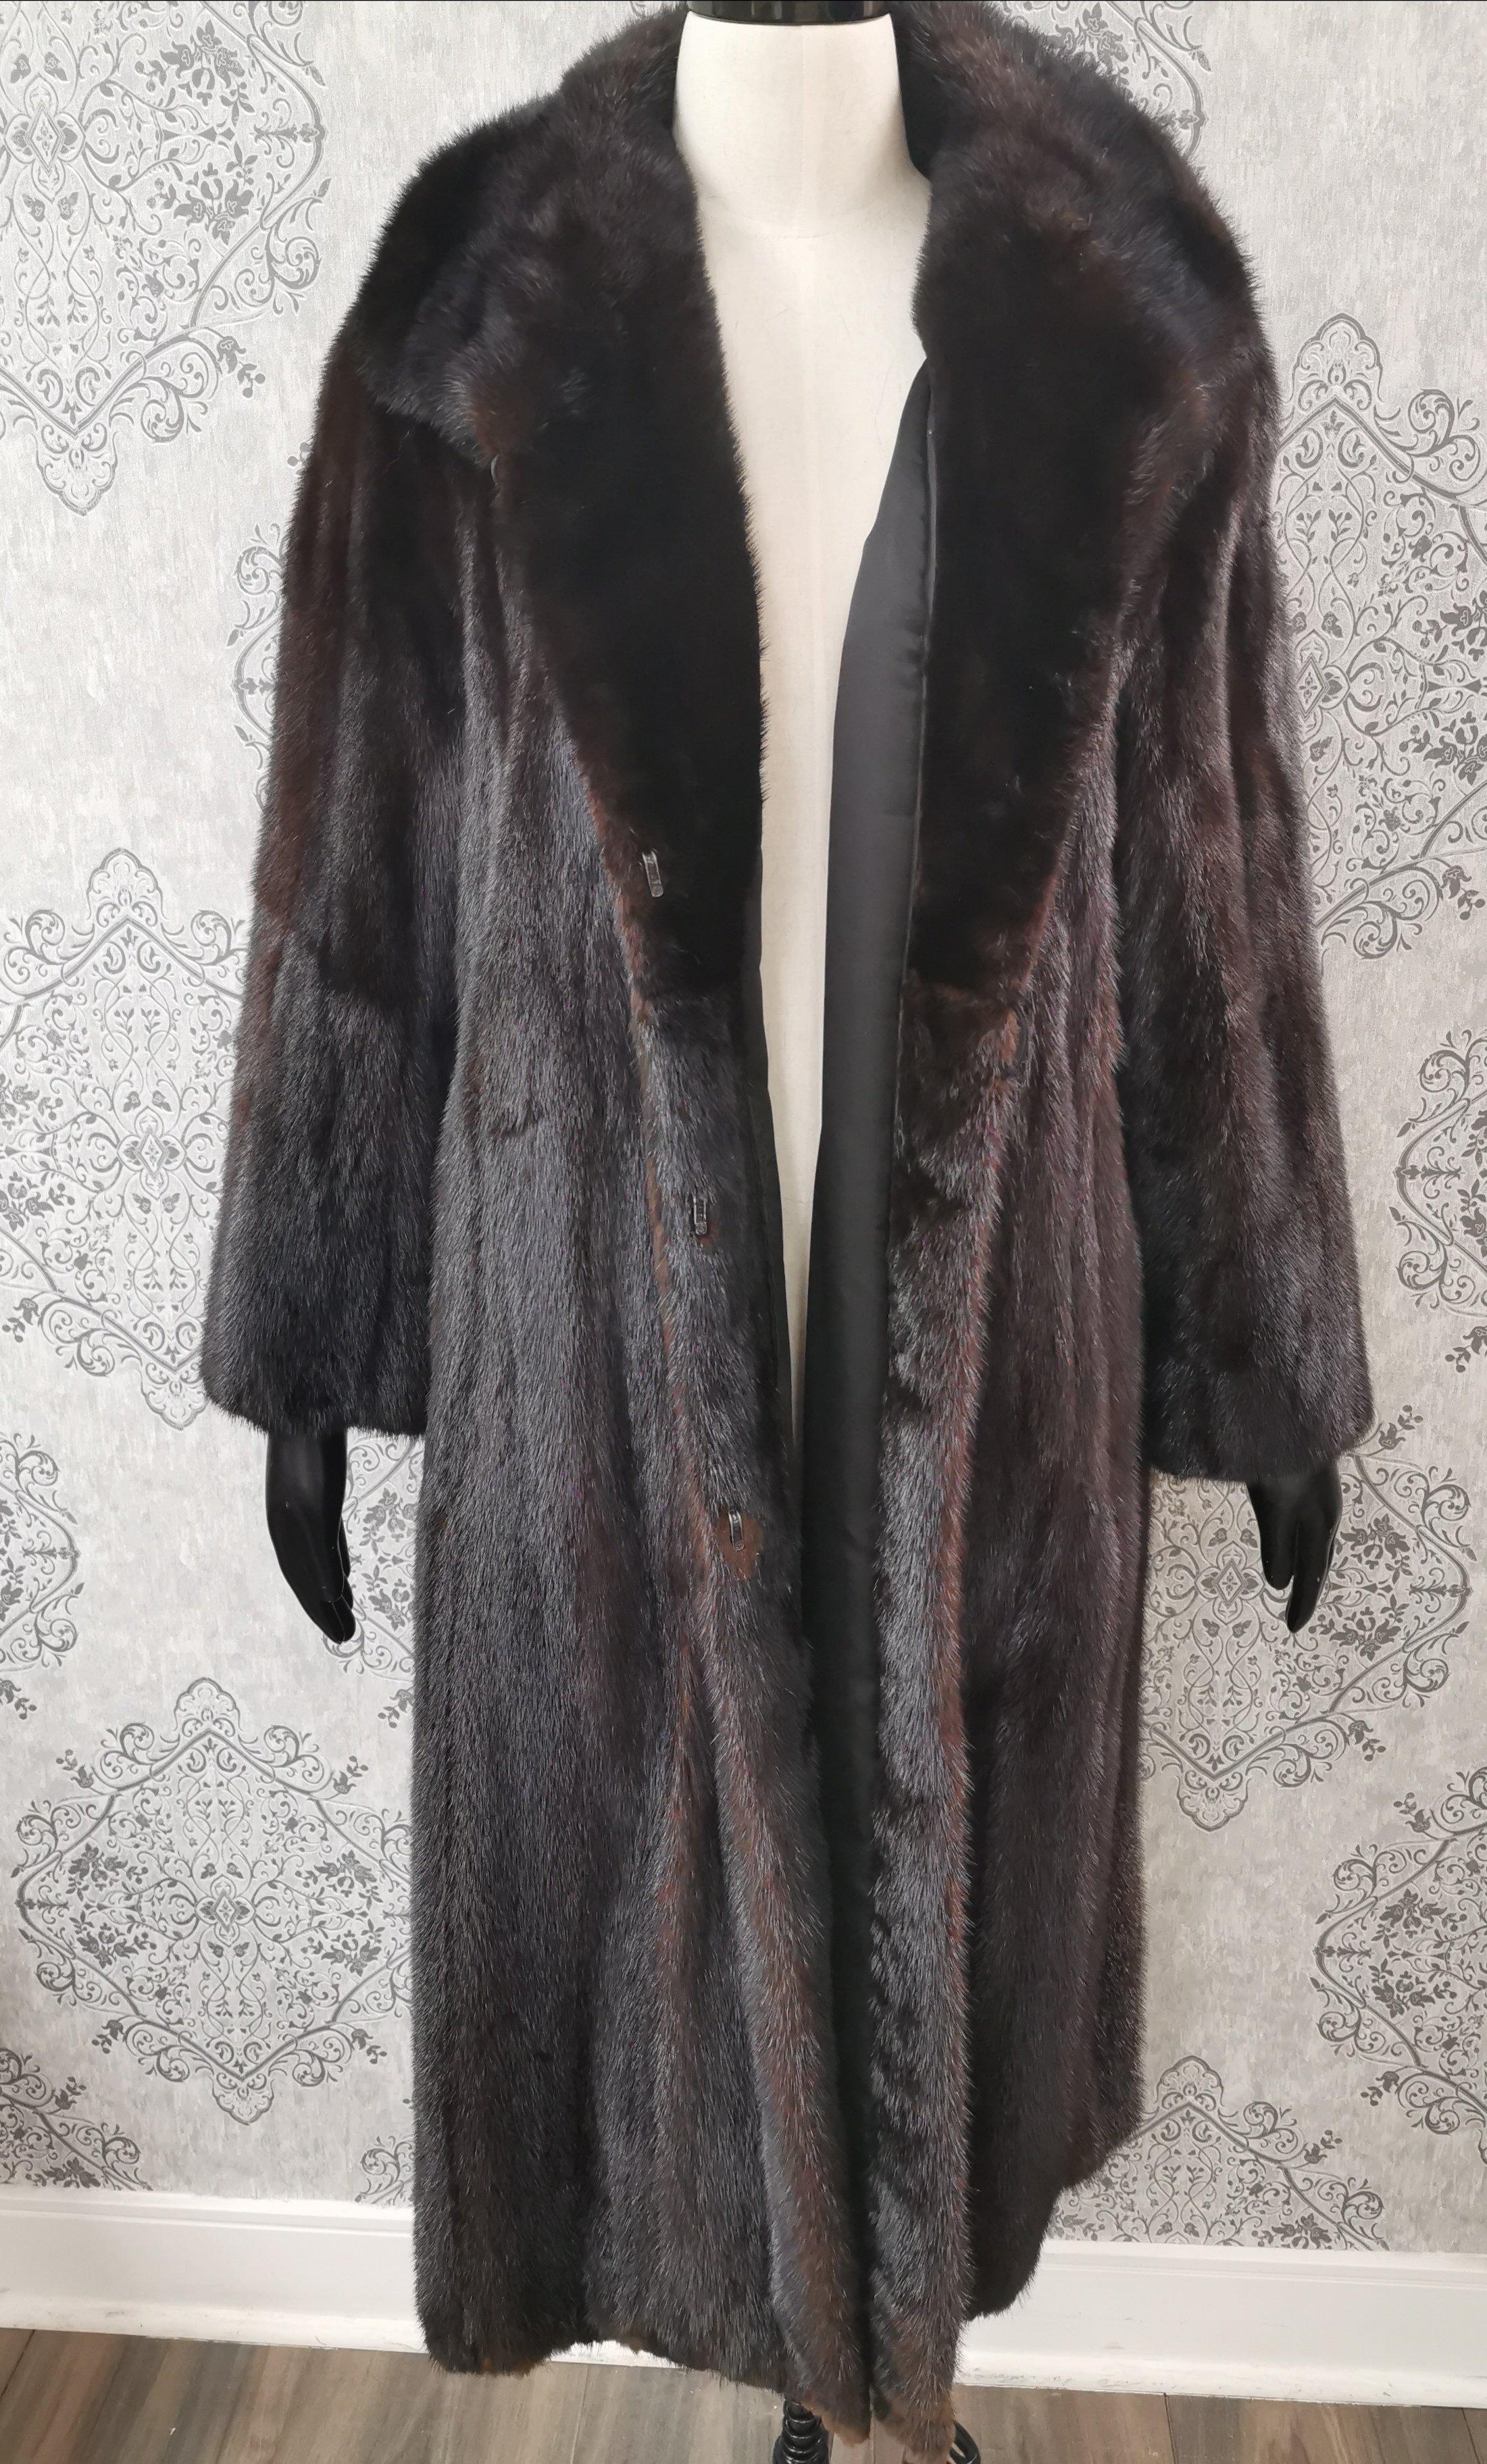 PRODUCT DESCRIPTION:

Brand new sleek style Ranch mink fur mid-length coat 

Condition: Like New

Closure: Hooks & Eyes

Color: Dark Mahogany
Material: Ranch Mink
Garment type: Mid-length coat

Sleeves: Dolman sleeves
Pockets: Two side